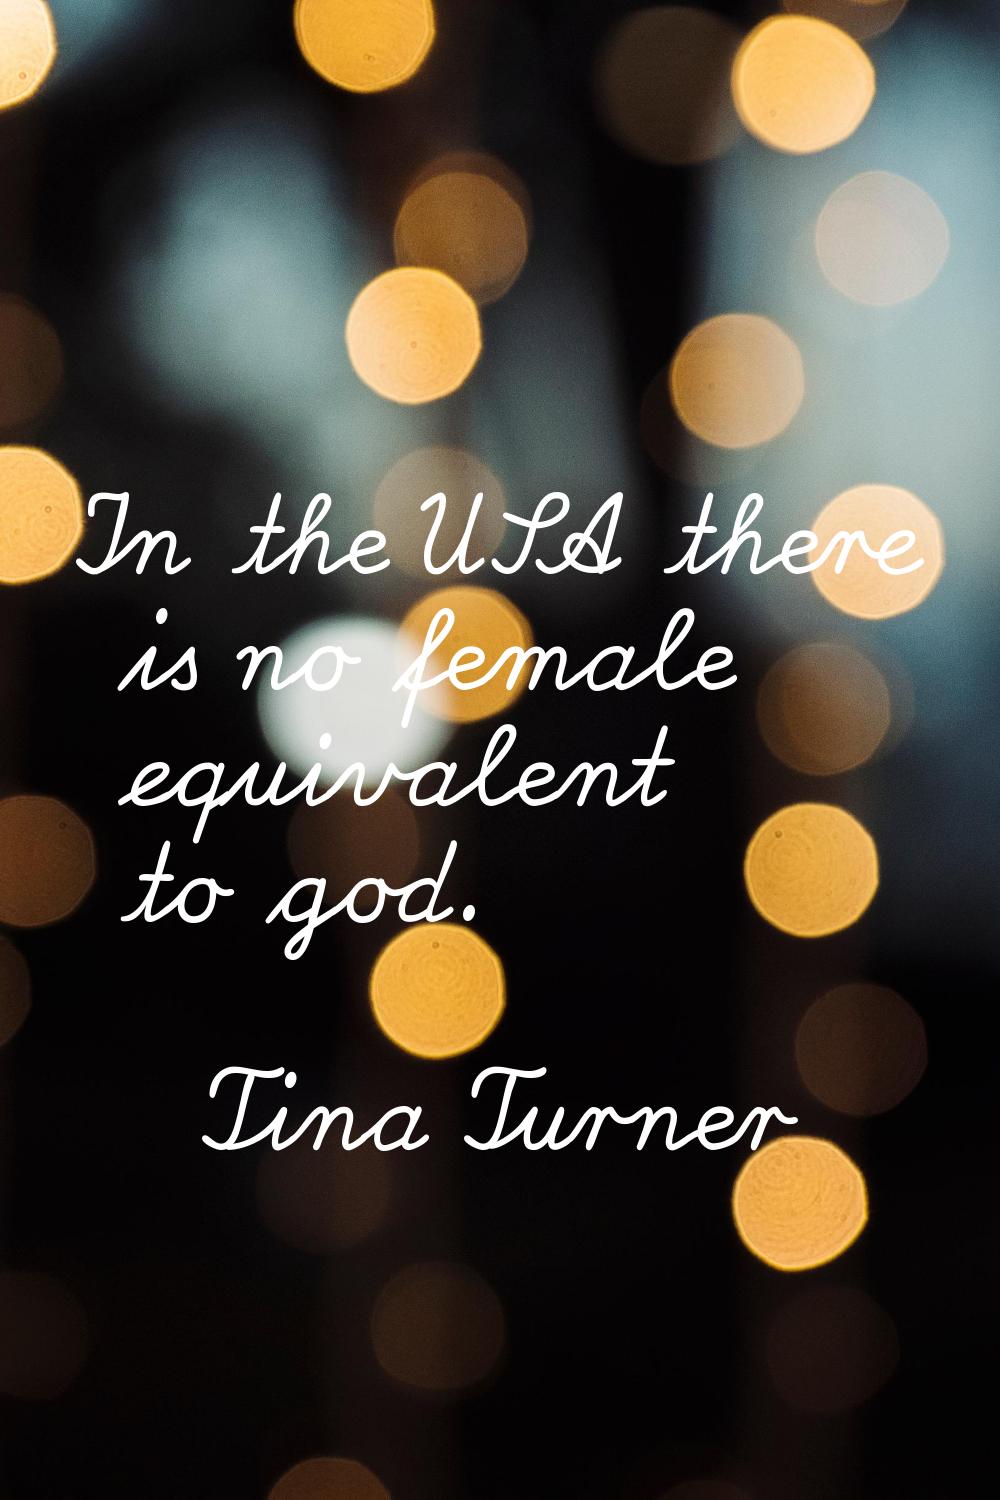 In the USA there is no female equivalent to god.